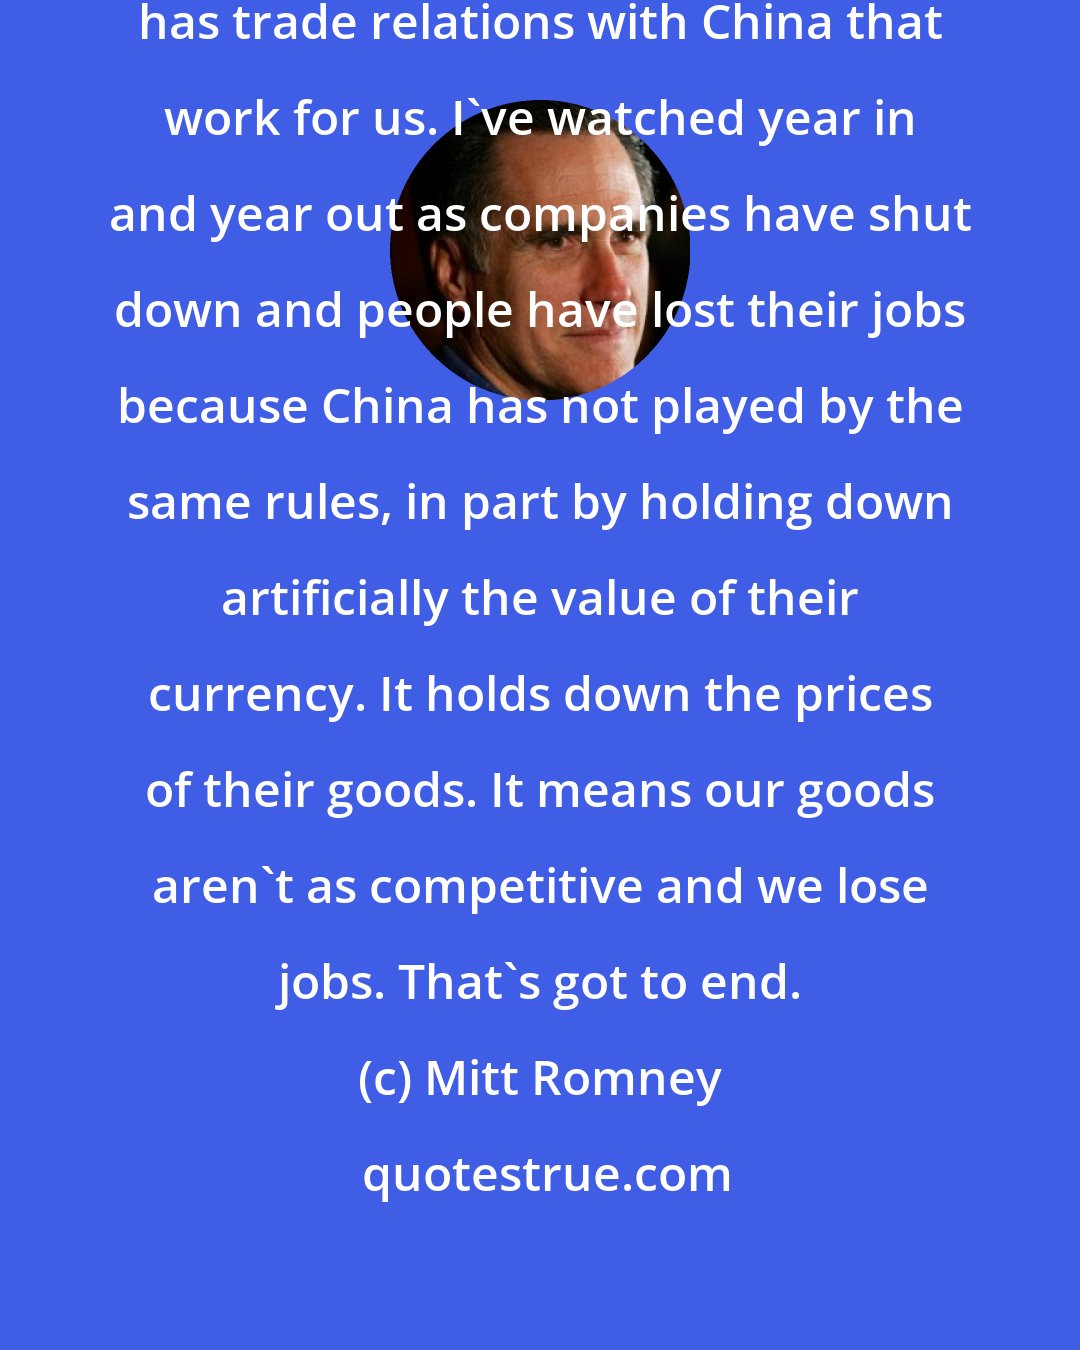 Mitt Romney: I'll also make sure that America has trade relations with China that work for us. I've watched year in and year out as companies have shut down and people have lost their jobs because China has not played by the same rules, in part by holding down artificially the value of their currency. It holds down the prices of their goods. It means our goods aren't as competitive and we lose jobs. That's got to end.